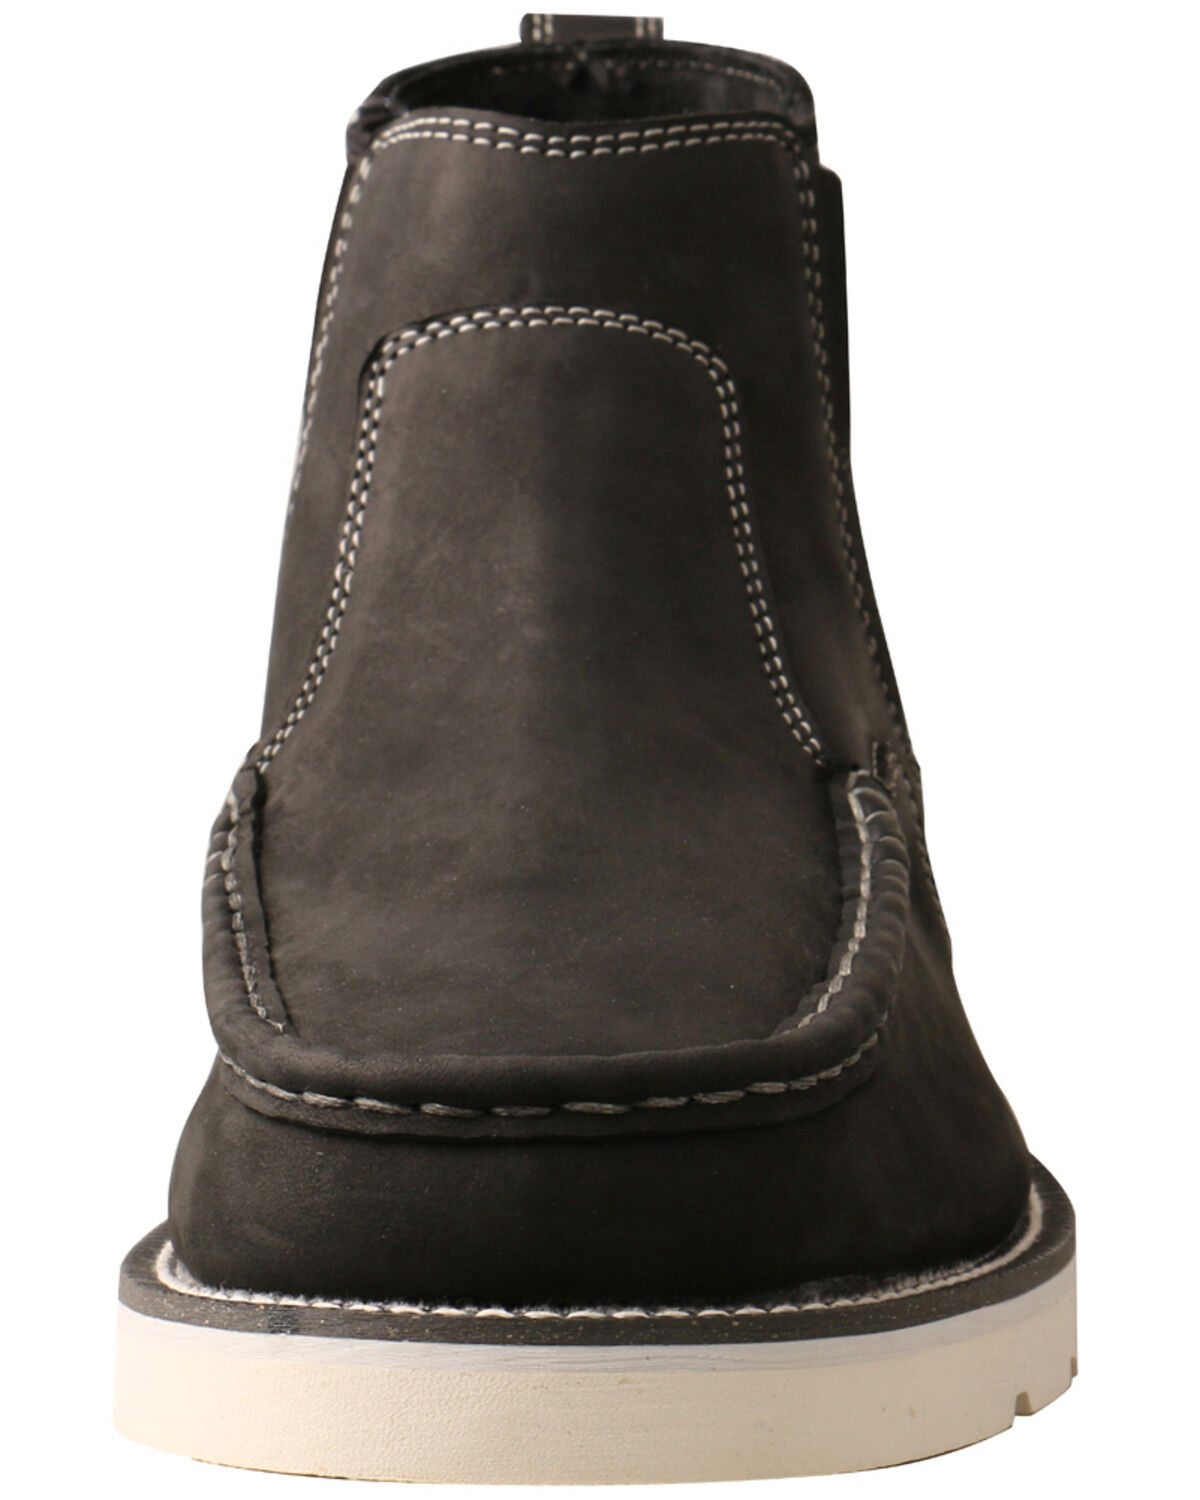 black wedge sole boots